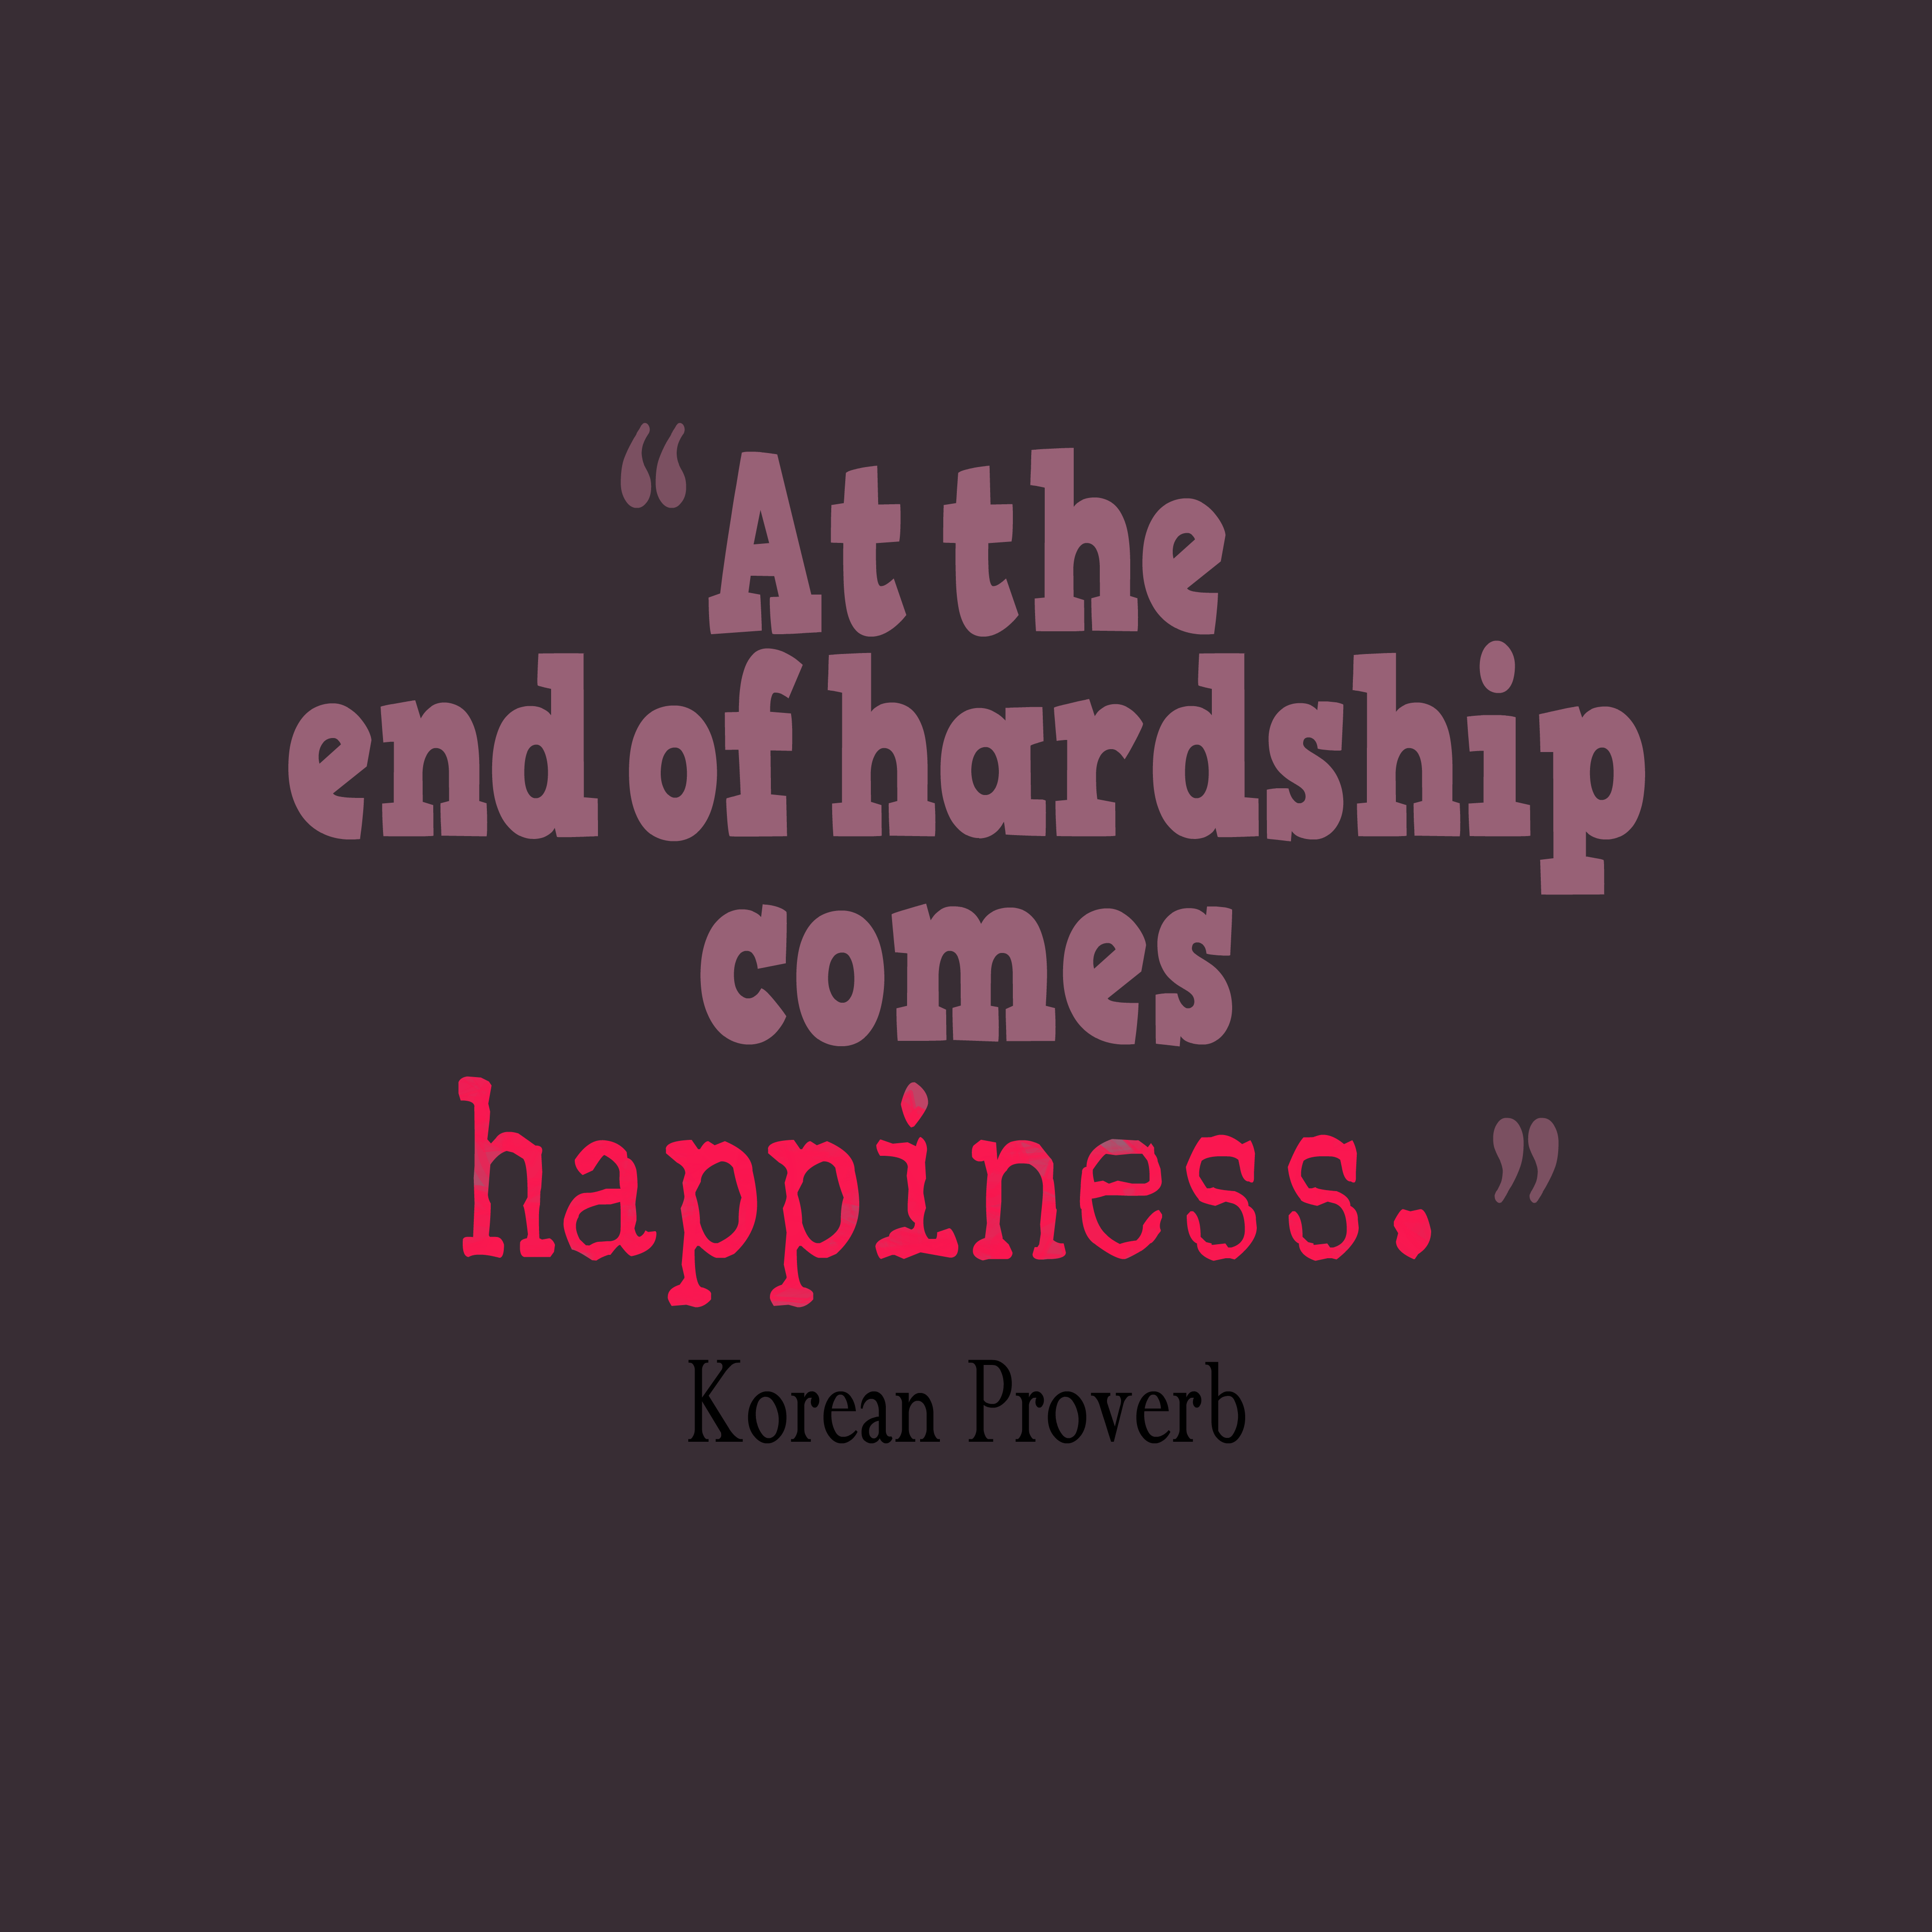 At the end of hardship es happiness